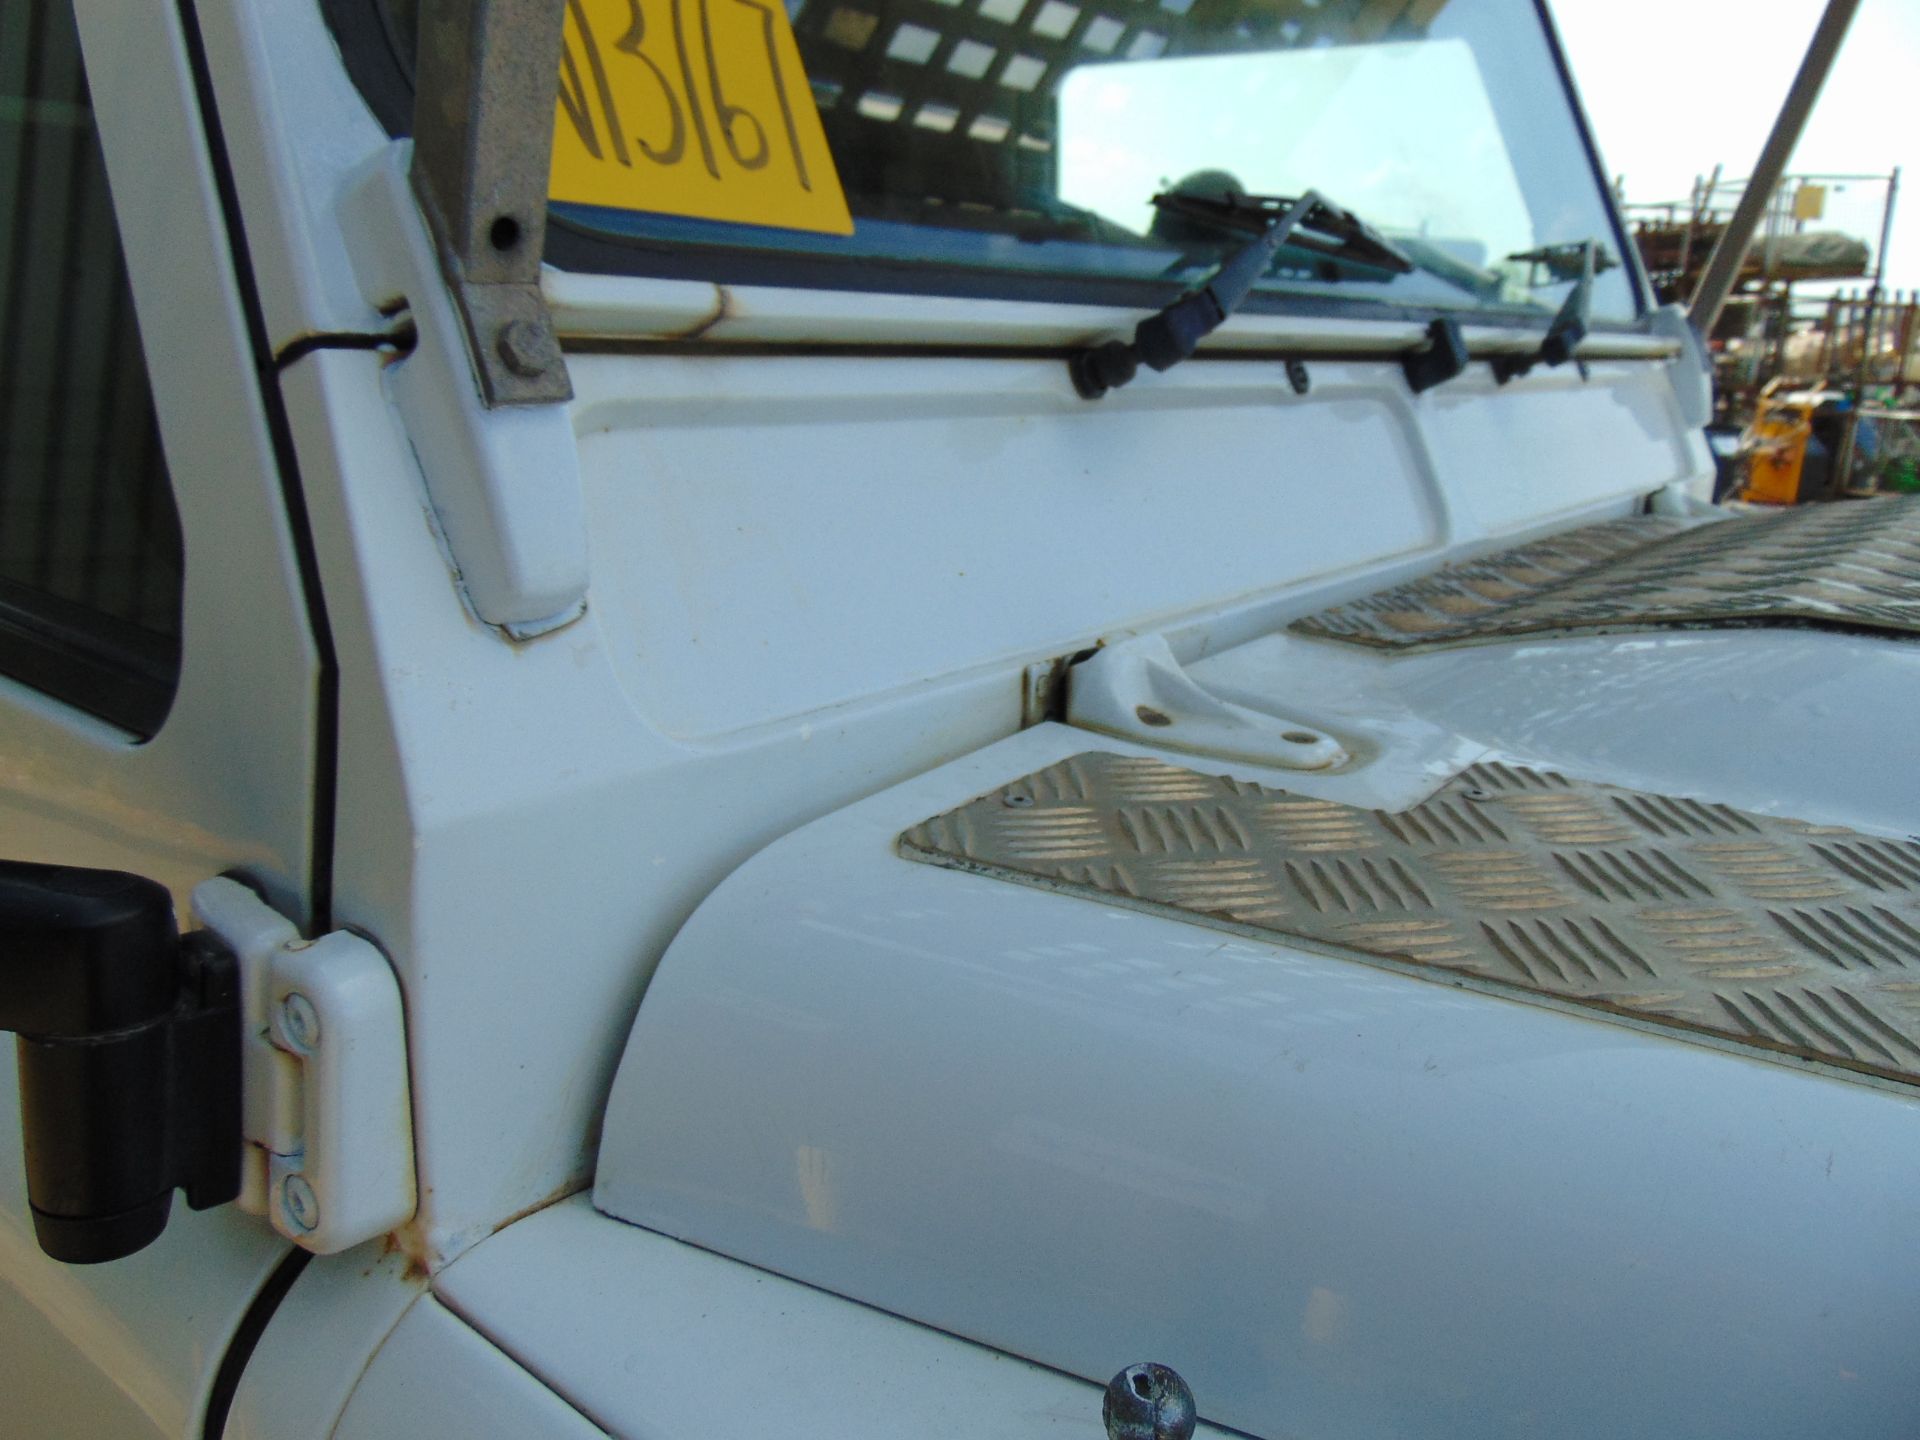 2011 Land Rover Defender 110 Puma hardtop 4x4 Utility vehicle (mobile workshop) with hydraulic winch - Image 13 of 53